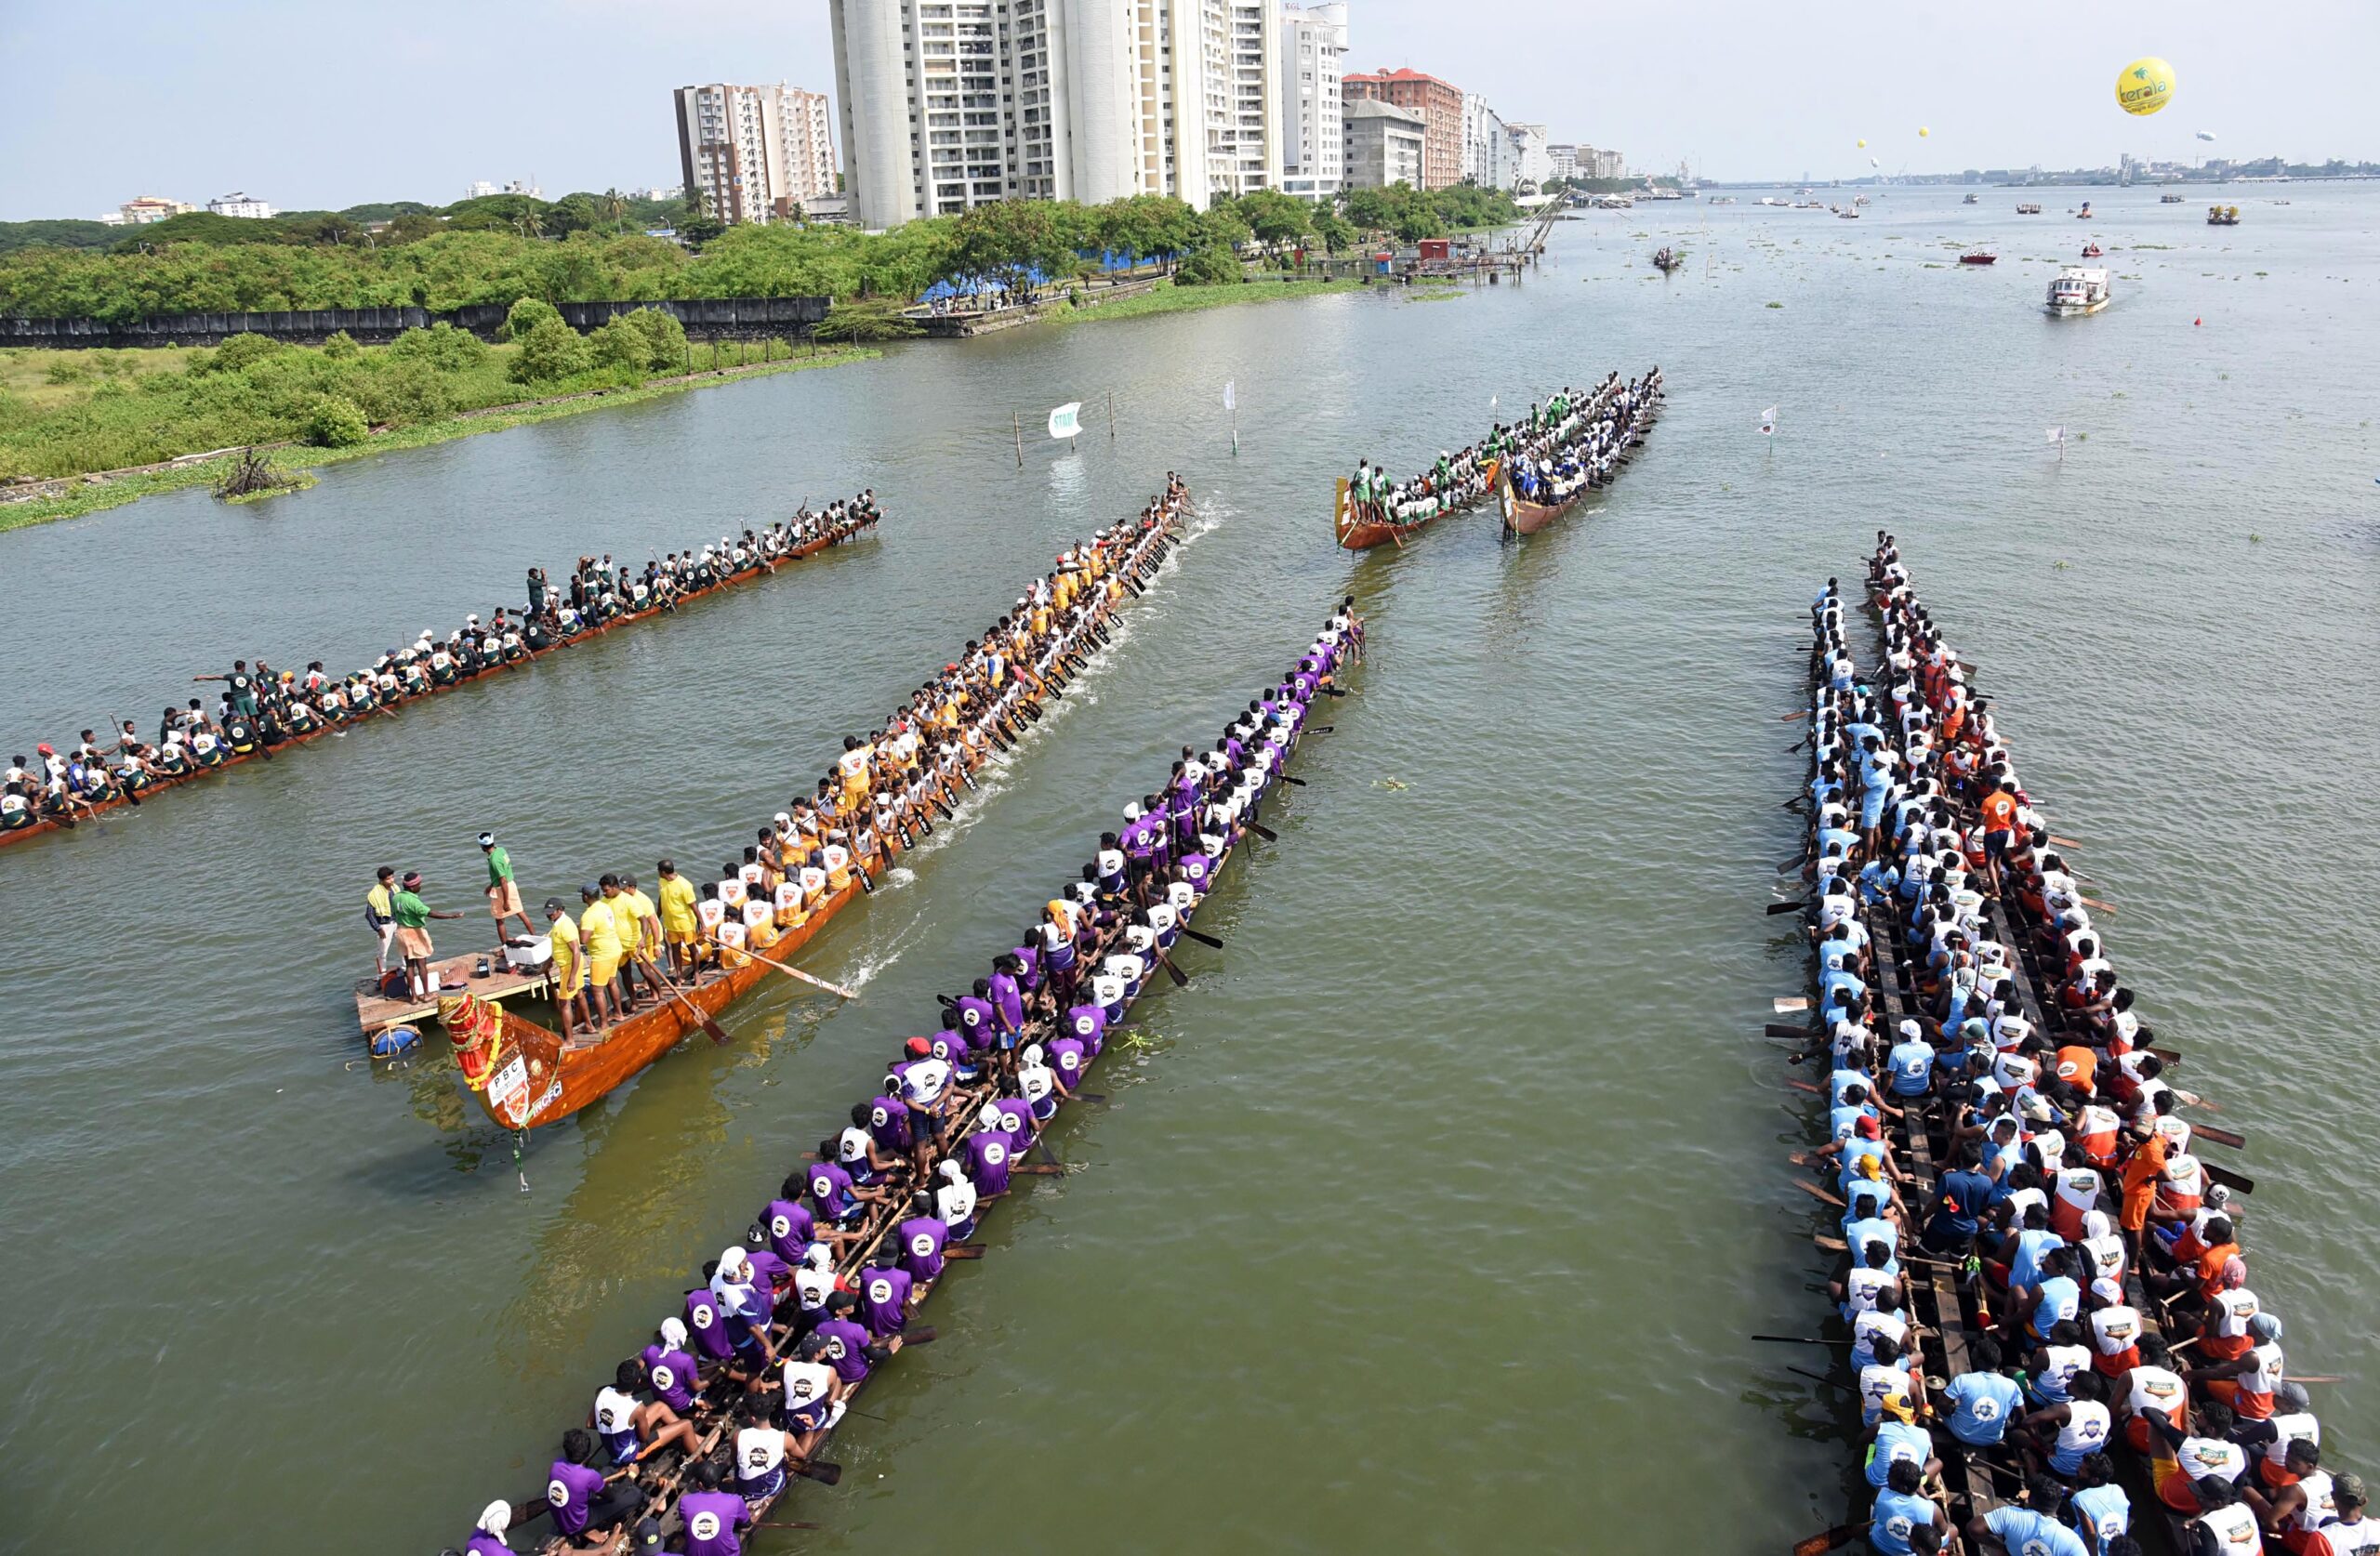 Alappuzha district all set for Nehru Trophy boat race